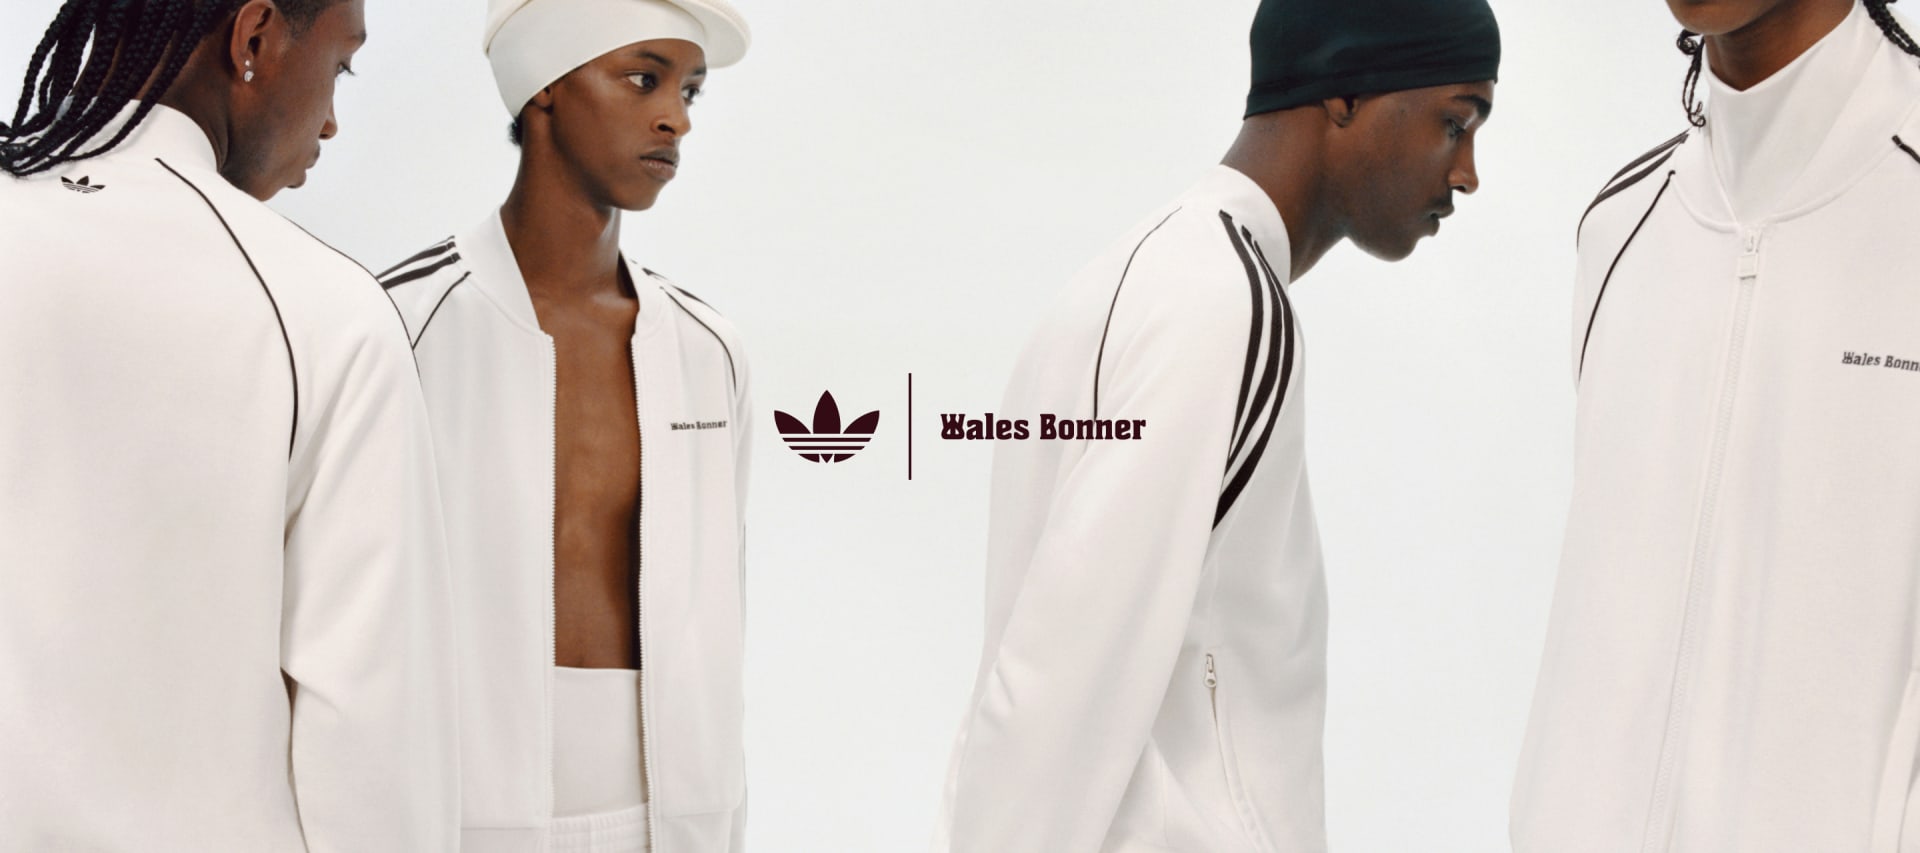 Four models are posing against a white background, all wearing white outfits from the adidas Originals by Wales Bonner collection.